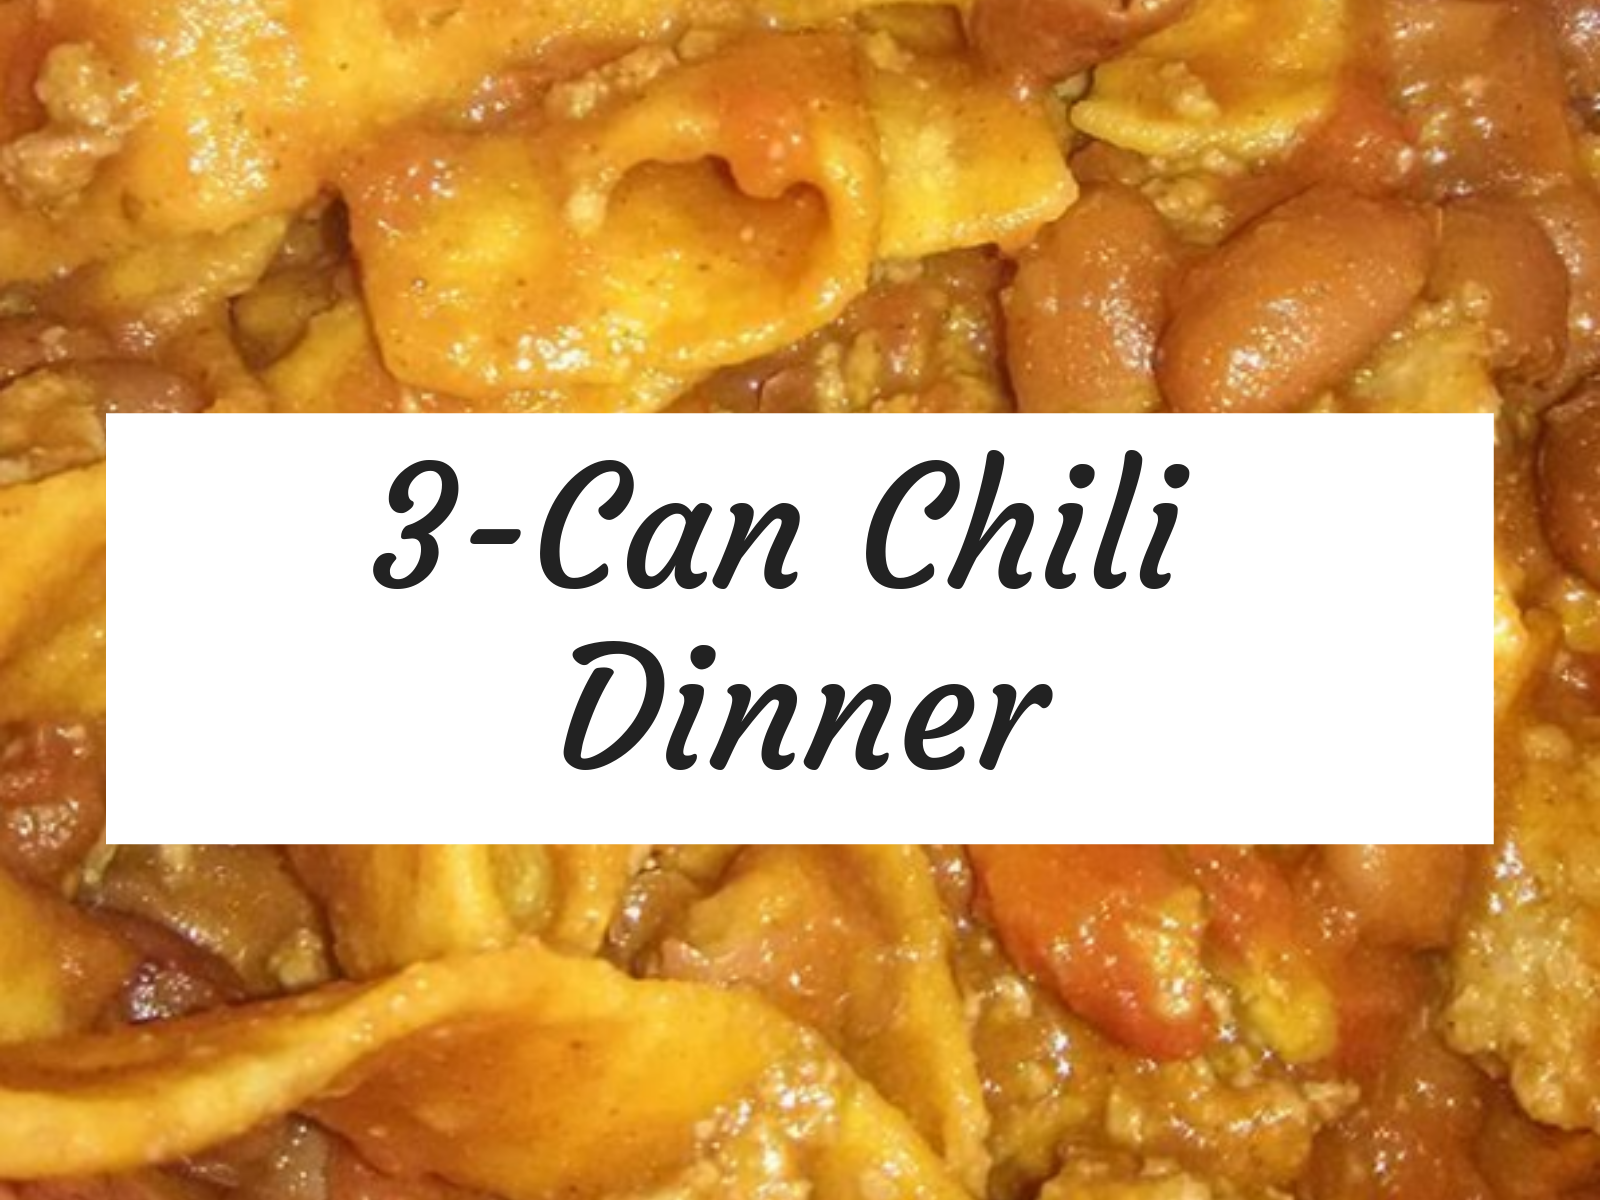 This 3-can chili is a filling meal that costs less than $2 for 2 ample adult portions. Vegetarian, vegan, gluten-free, dairy-free.